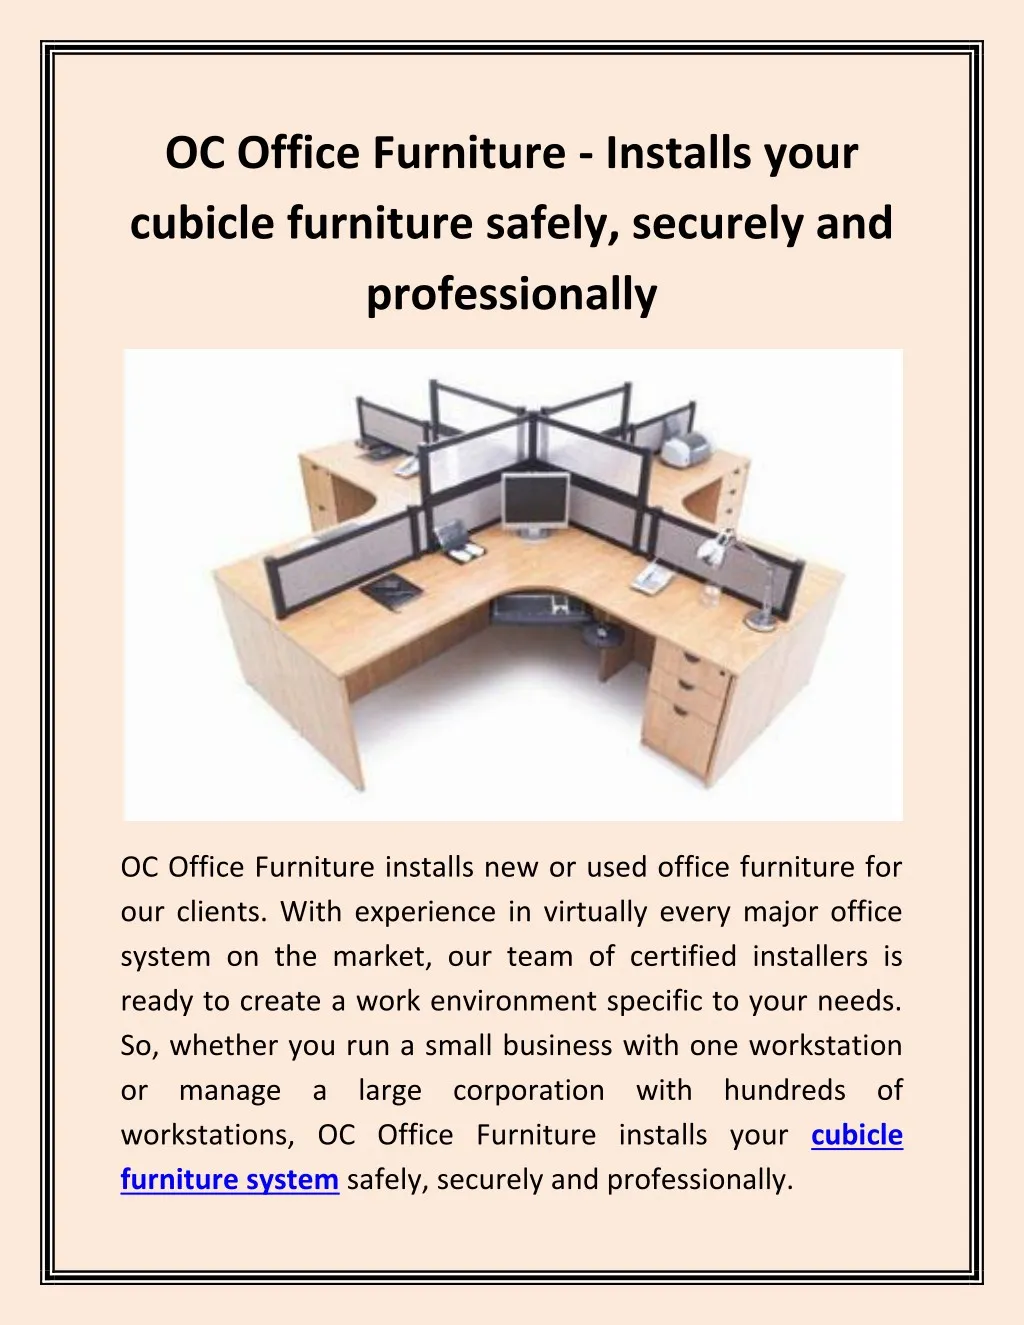 oc office furniture installs your cubicle